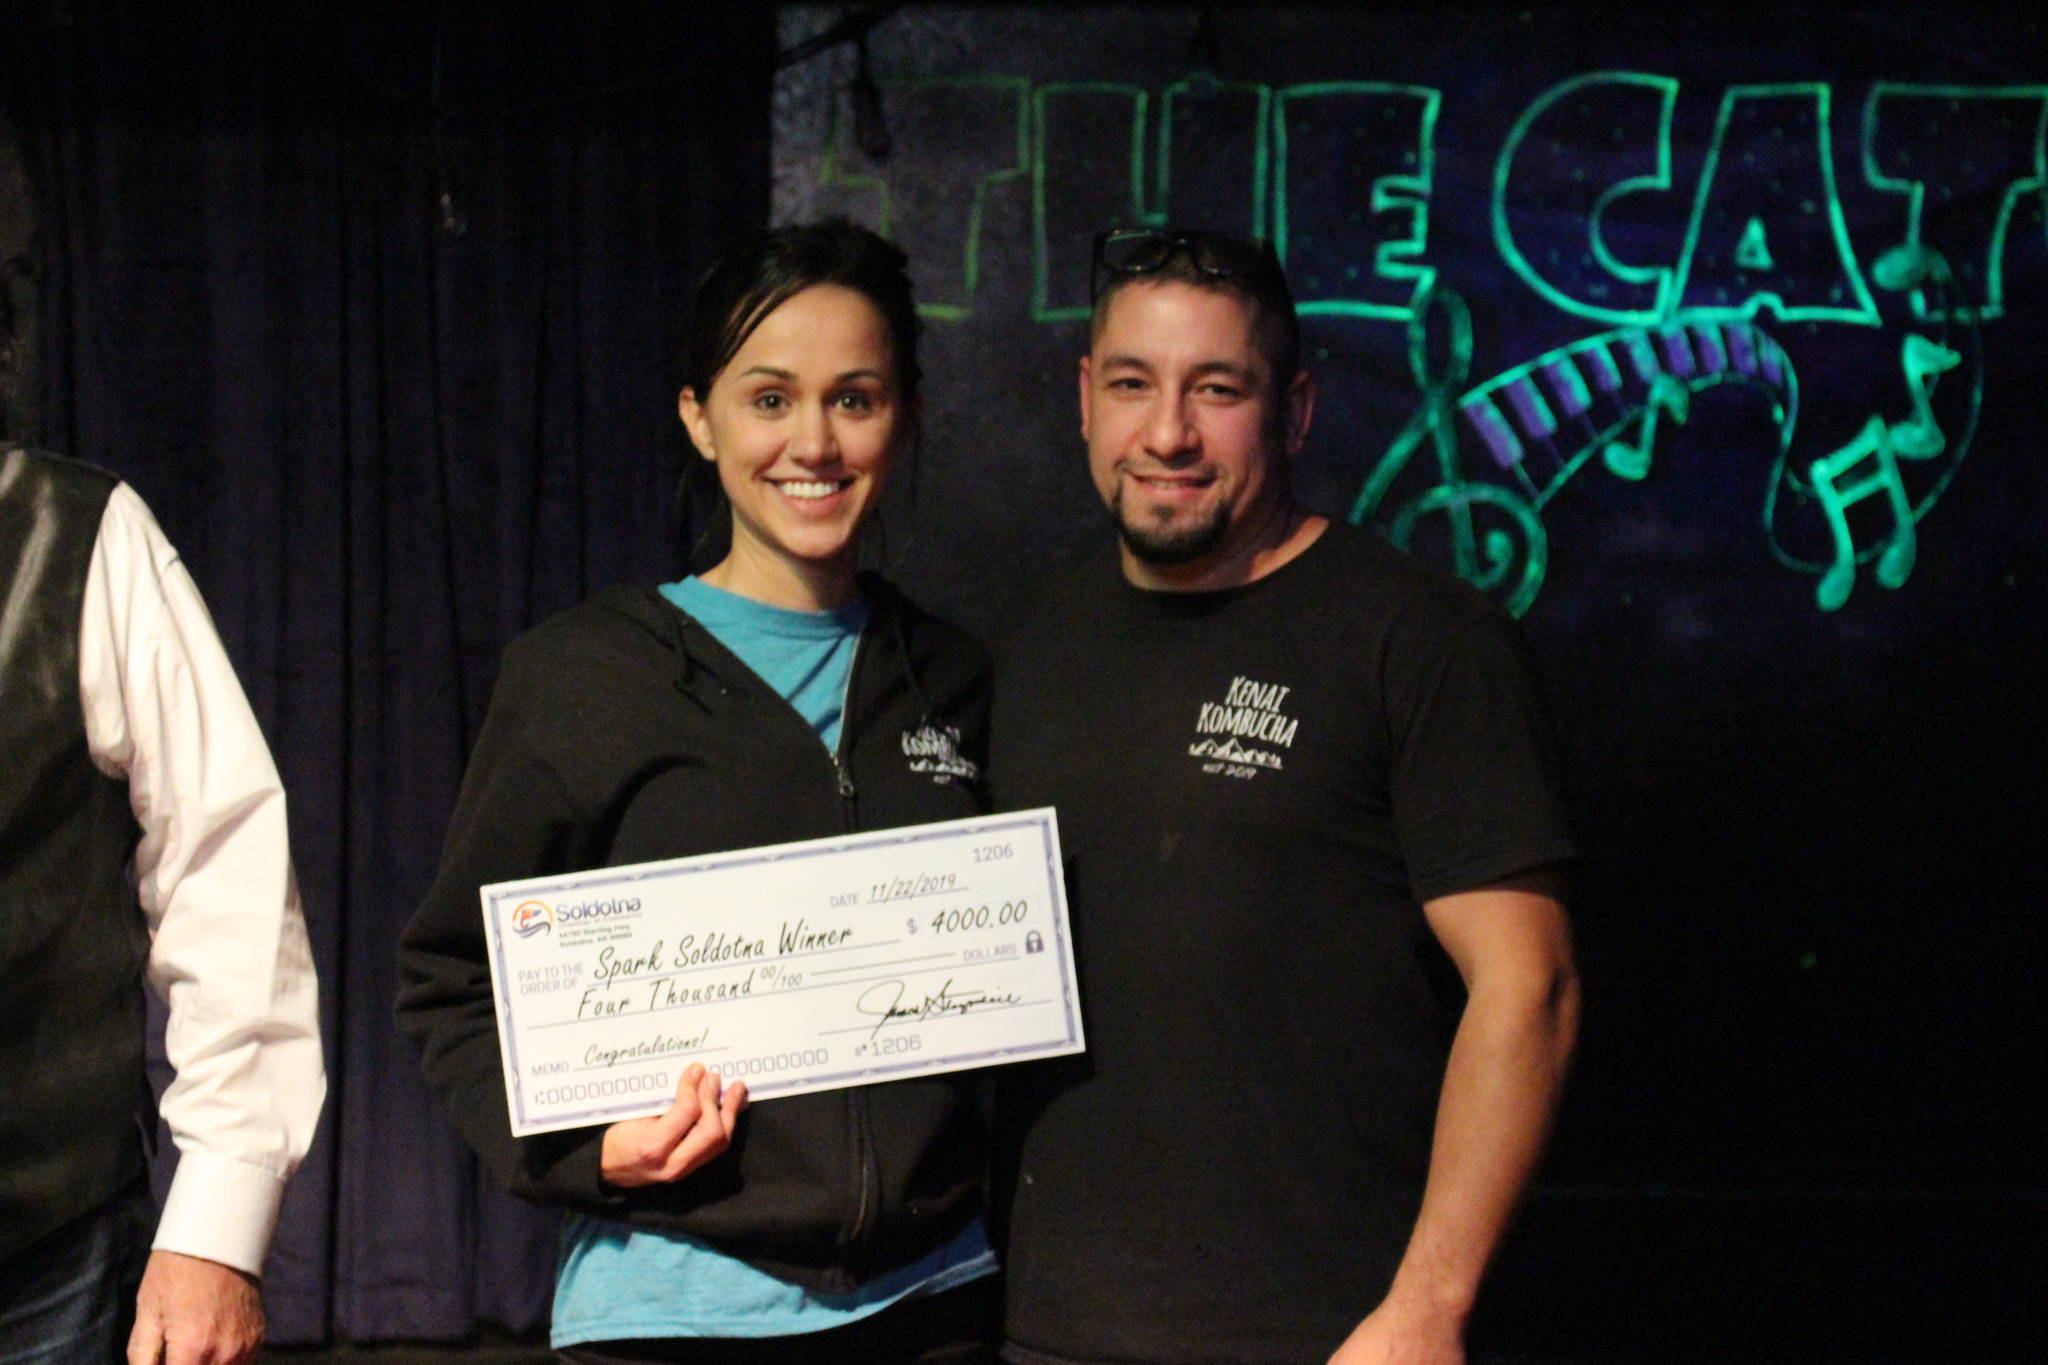 Devon and Brian Gonzalez smile with their check for $4,000 after being declared the winners of the Spark Soldotna competition at the Catch Restaurant in Soldotna, Alaska, on Friday, Nov. 22, 2019. (Photo by Brian Mazurek/Peninsula Clarion)